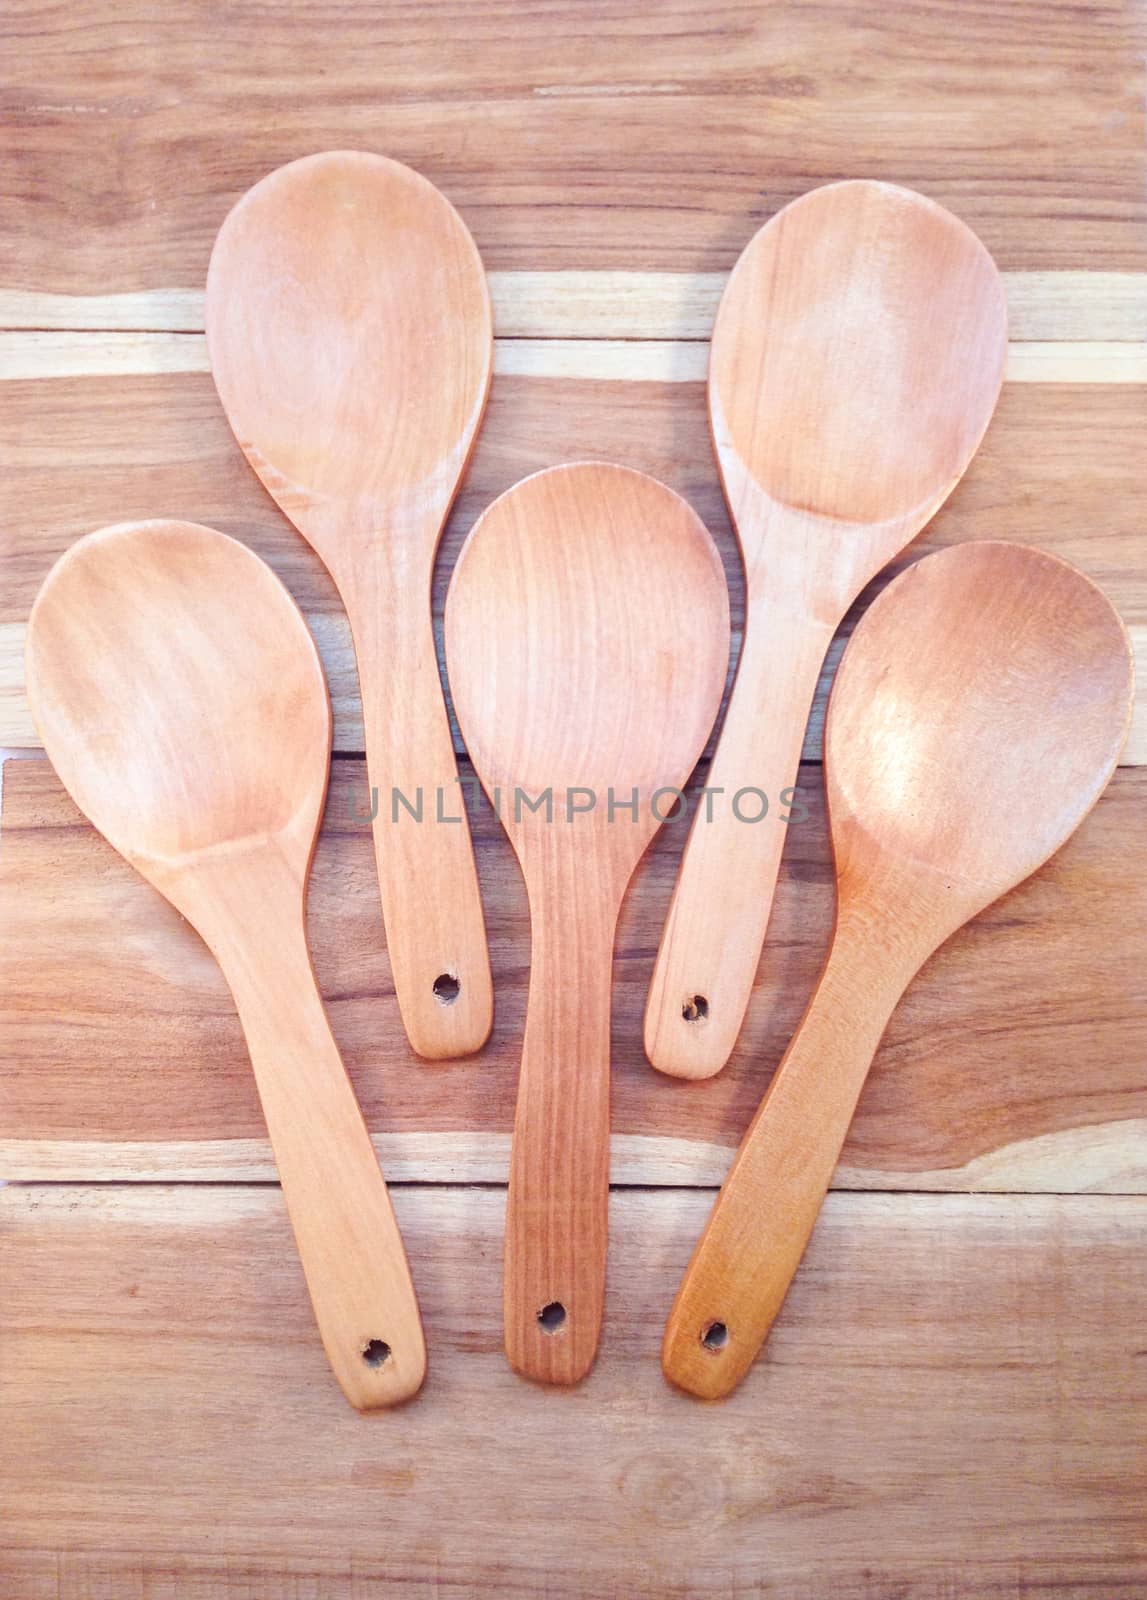 Wooden ladle on wooden background